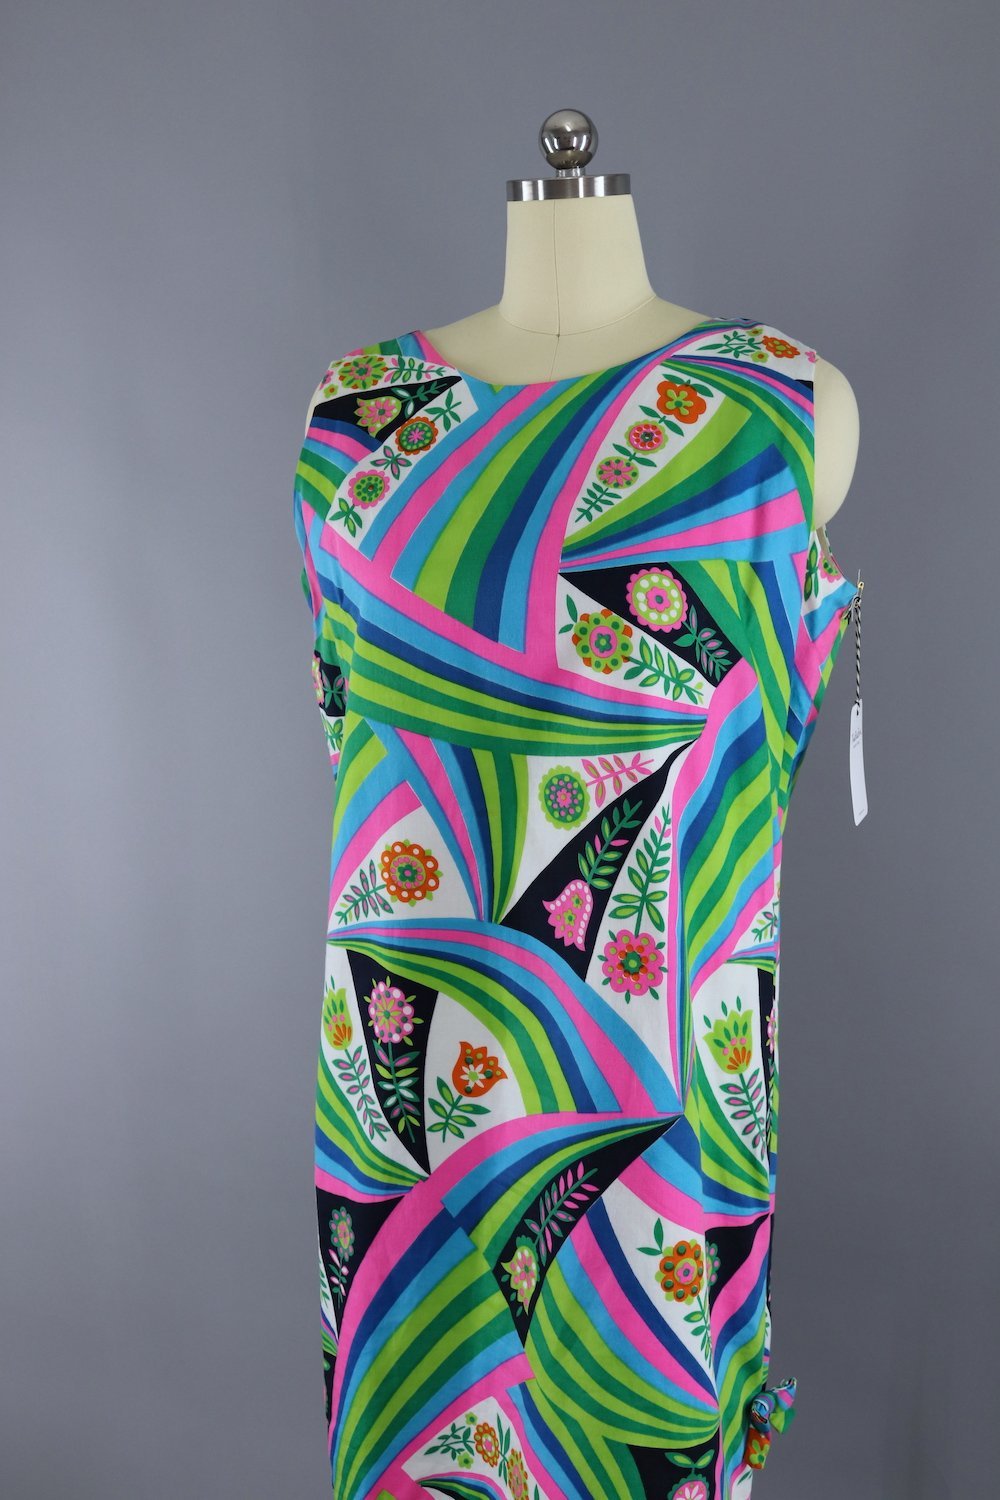 1960s Vintage Mod Shift Dress / Green & Neon Pink Abstract Floral Print - ThisBlueBird